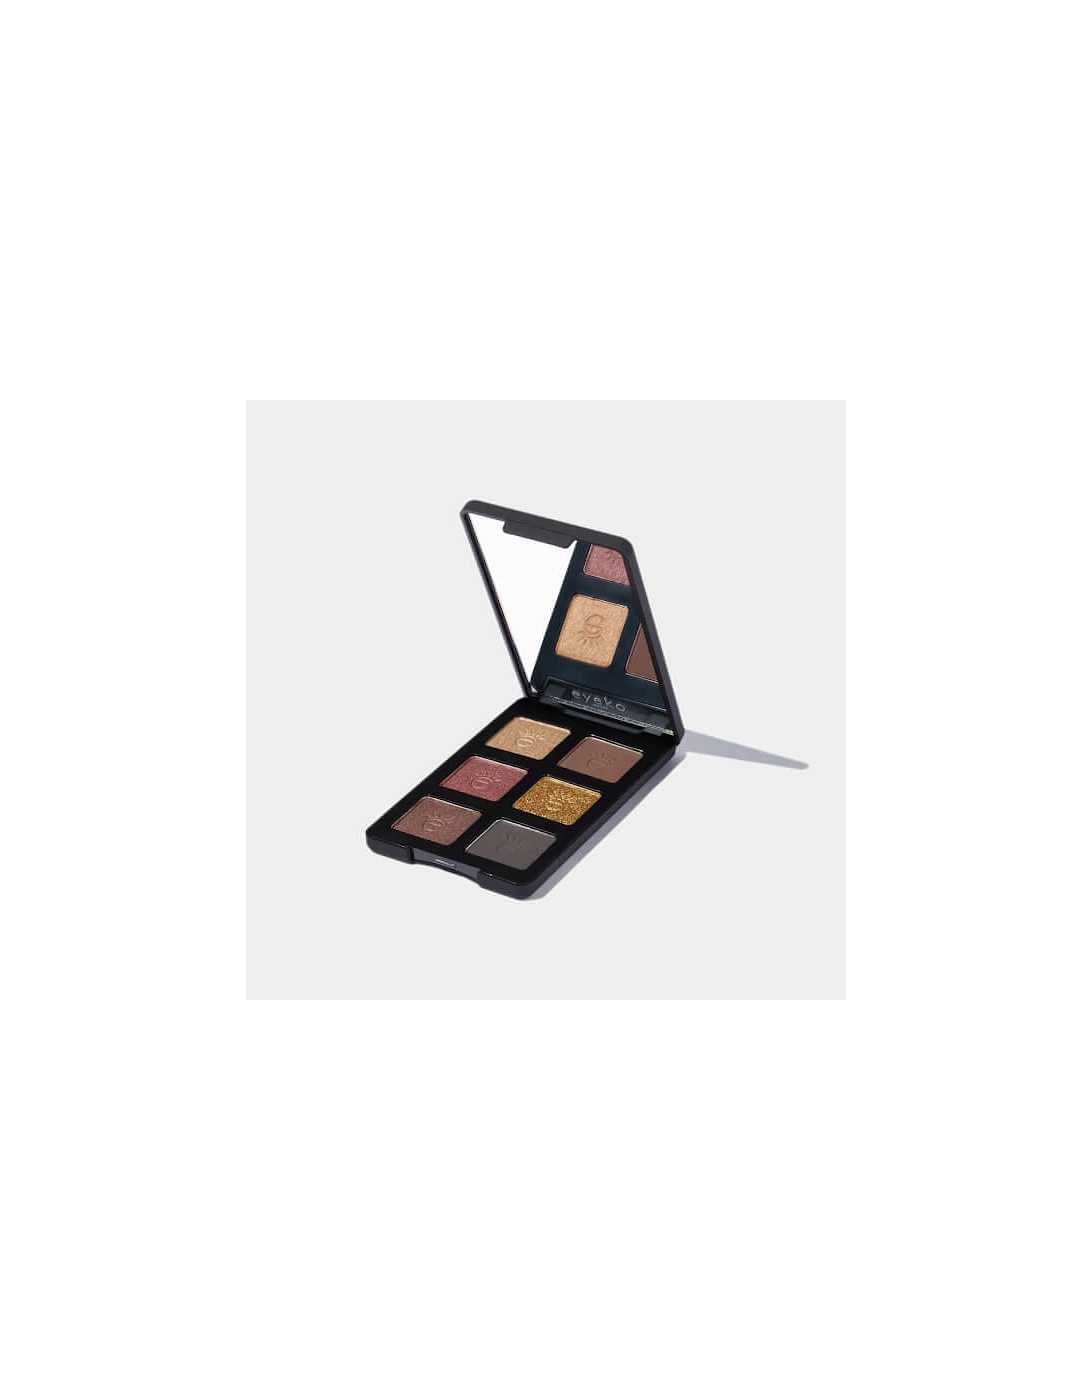 Limitless Eyeshadow Palette 3, 2 of 1